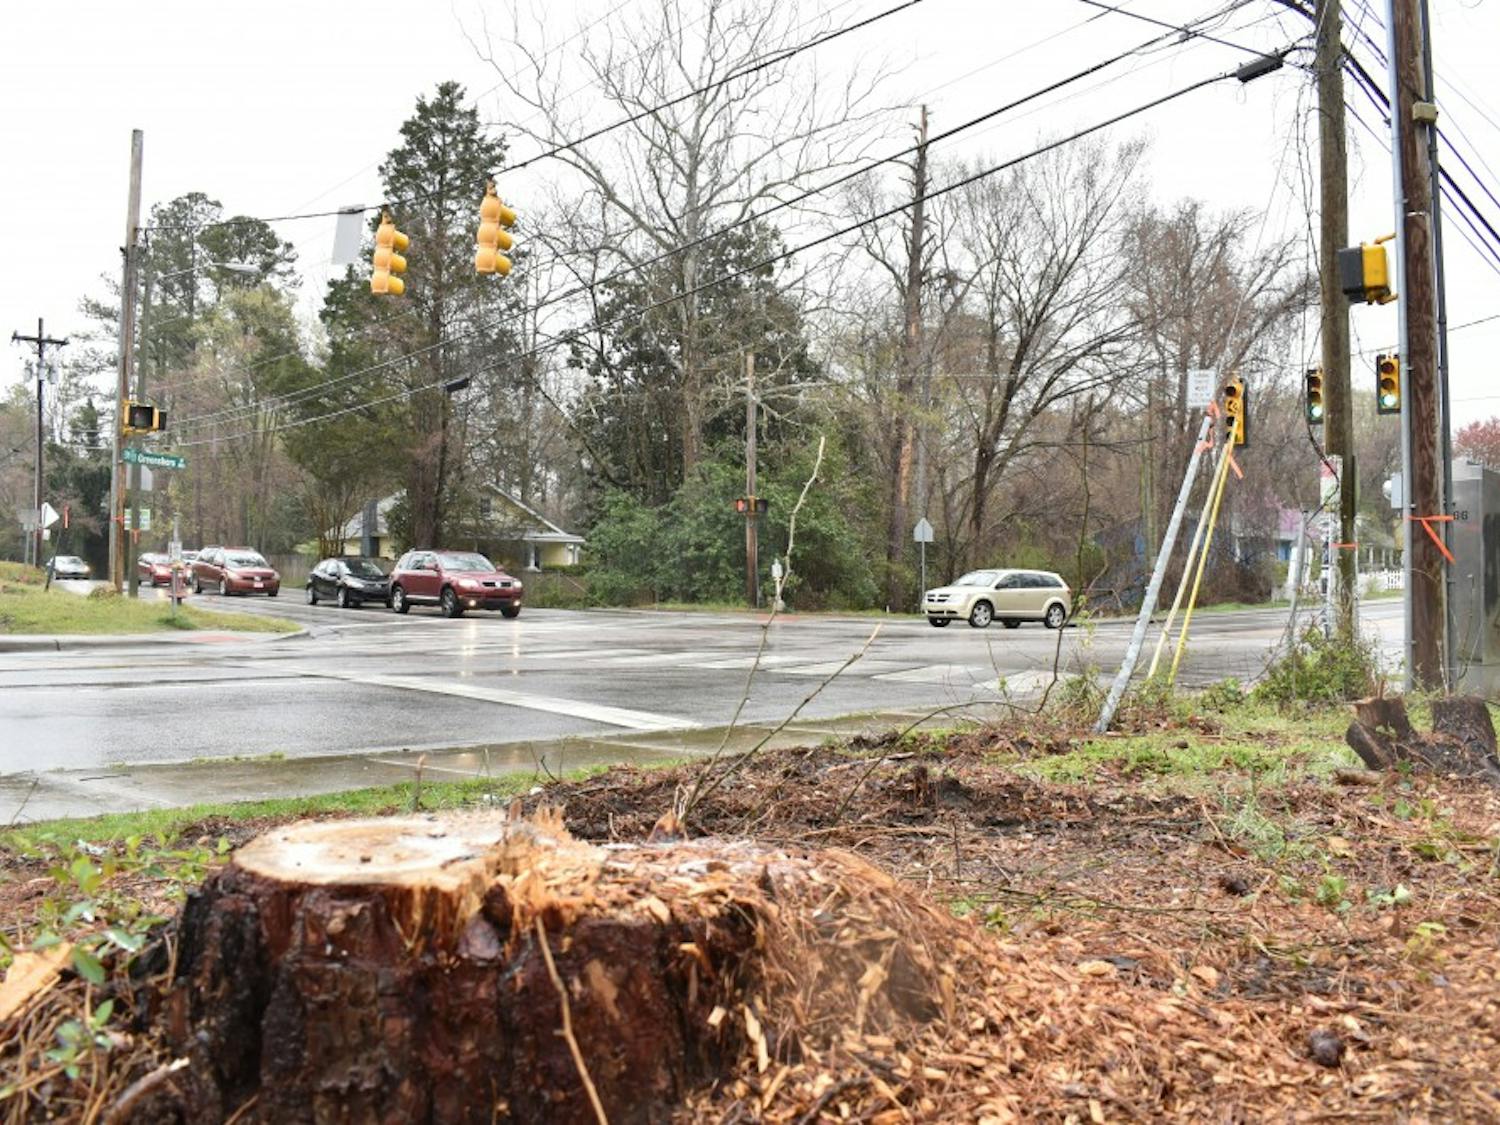 At the intersection of Estes Dr. and North Greensboro St. trees have been cut down and power lines are being relocated as the city of Carrboro is starting to prepare for construction on a roundabout on that intersection. Photographed on April 2, 2019.